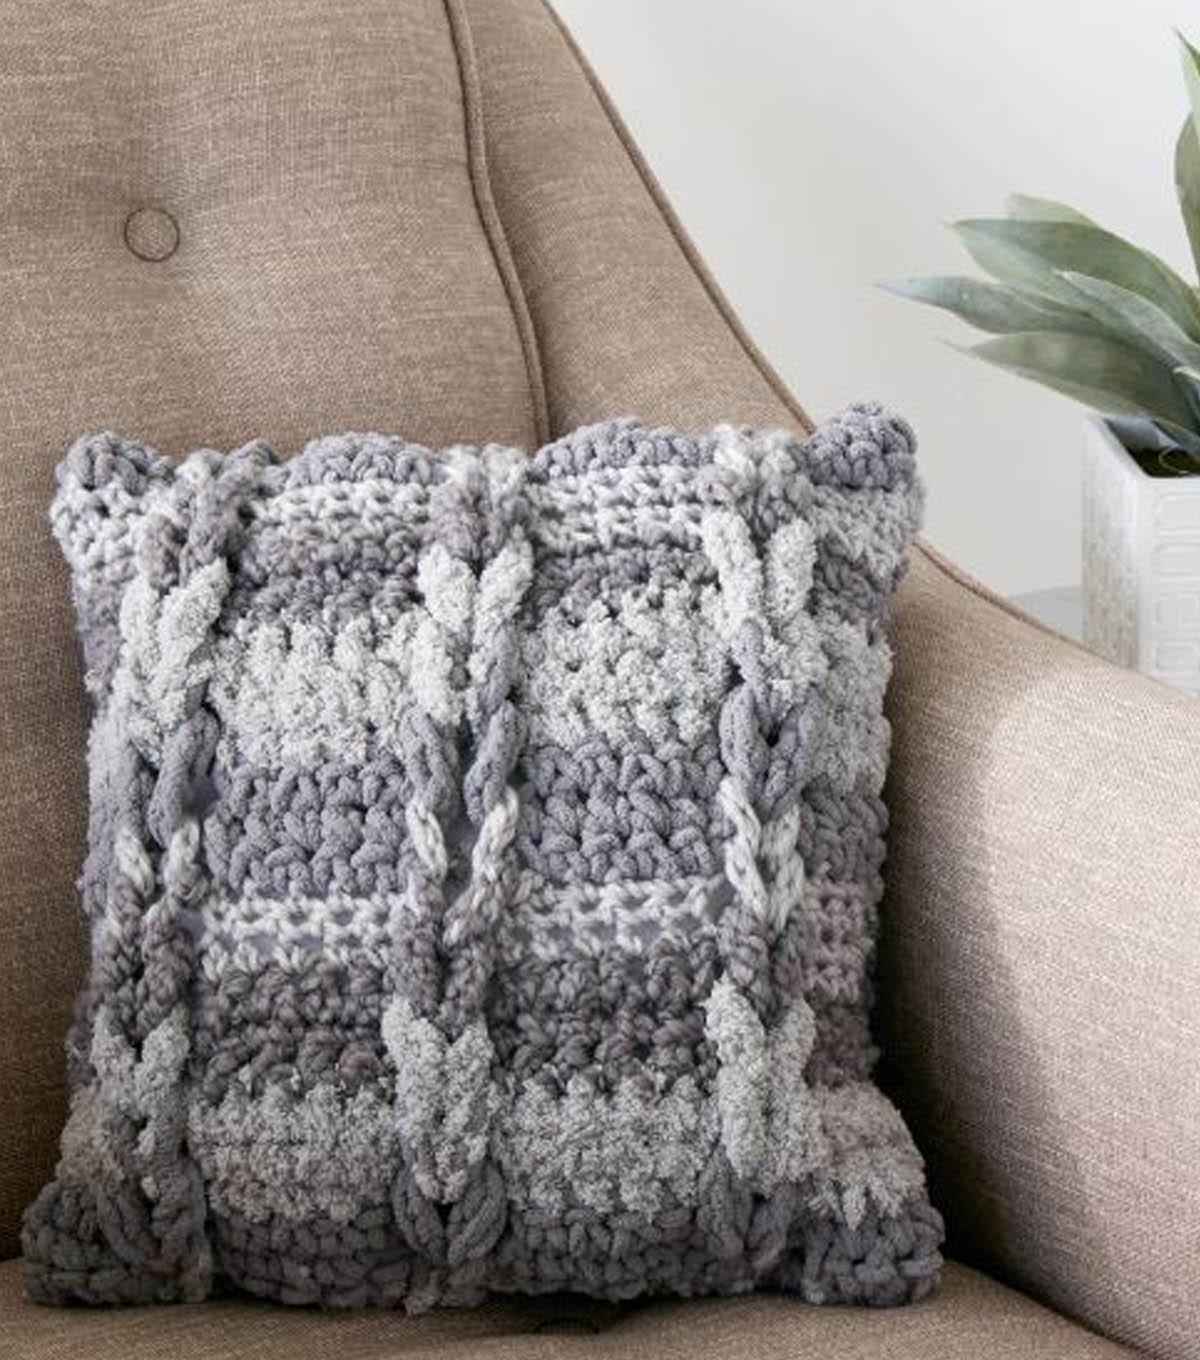 Knitting Pattern For Cushion Cover With Cables How To Crochet A Cable Pillow Joann